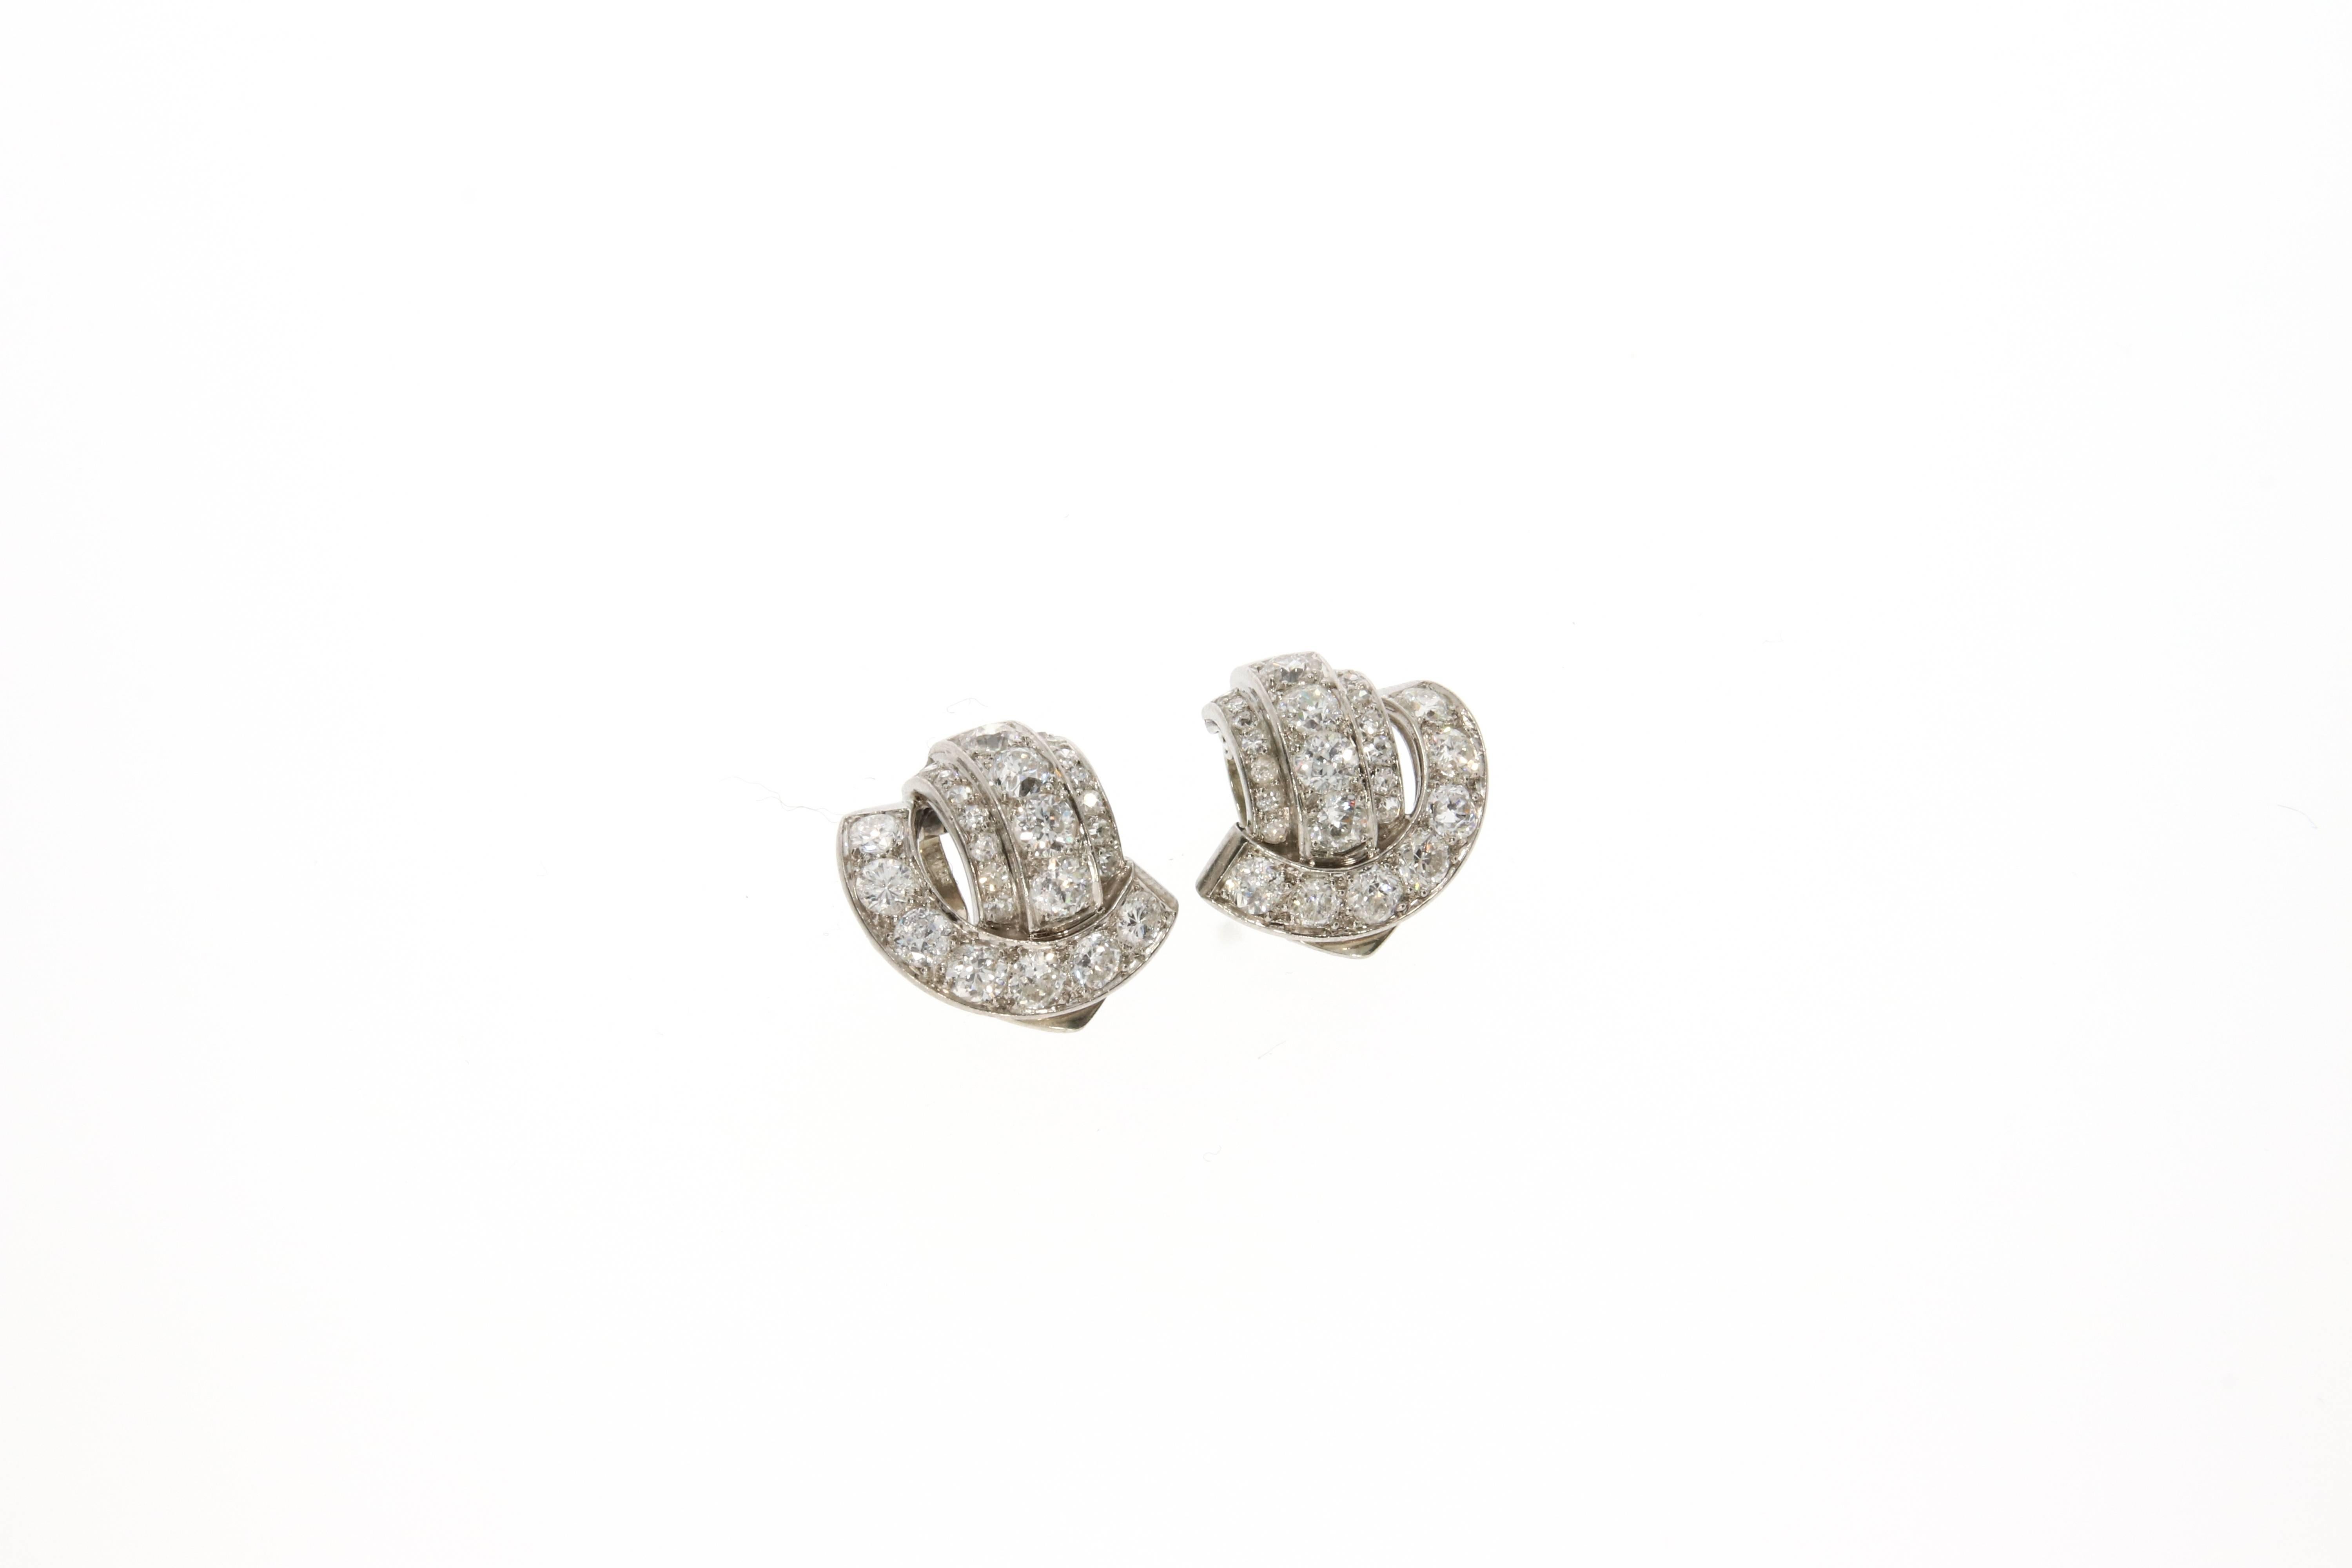 A beautiful pair of platinum set diamond earclips, by Boivin. The curved settings are embedded with 50 old mine cut diamonds weighing approximately 3.30 carats in total. French hallmarks for 18 karat gold and platinum and maker´s mark are stamped on